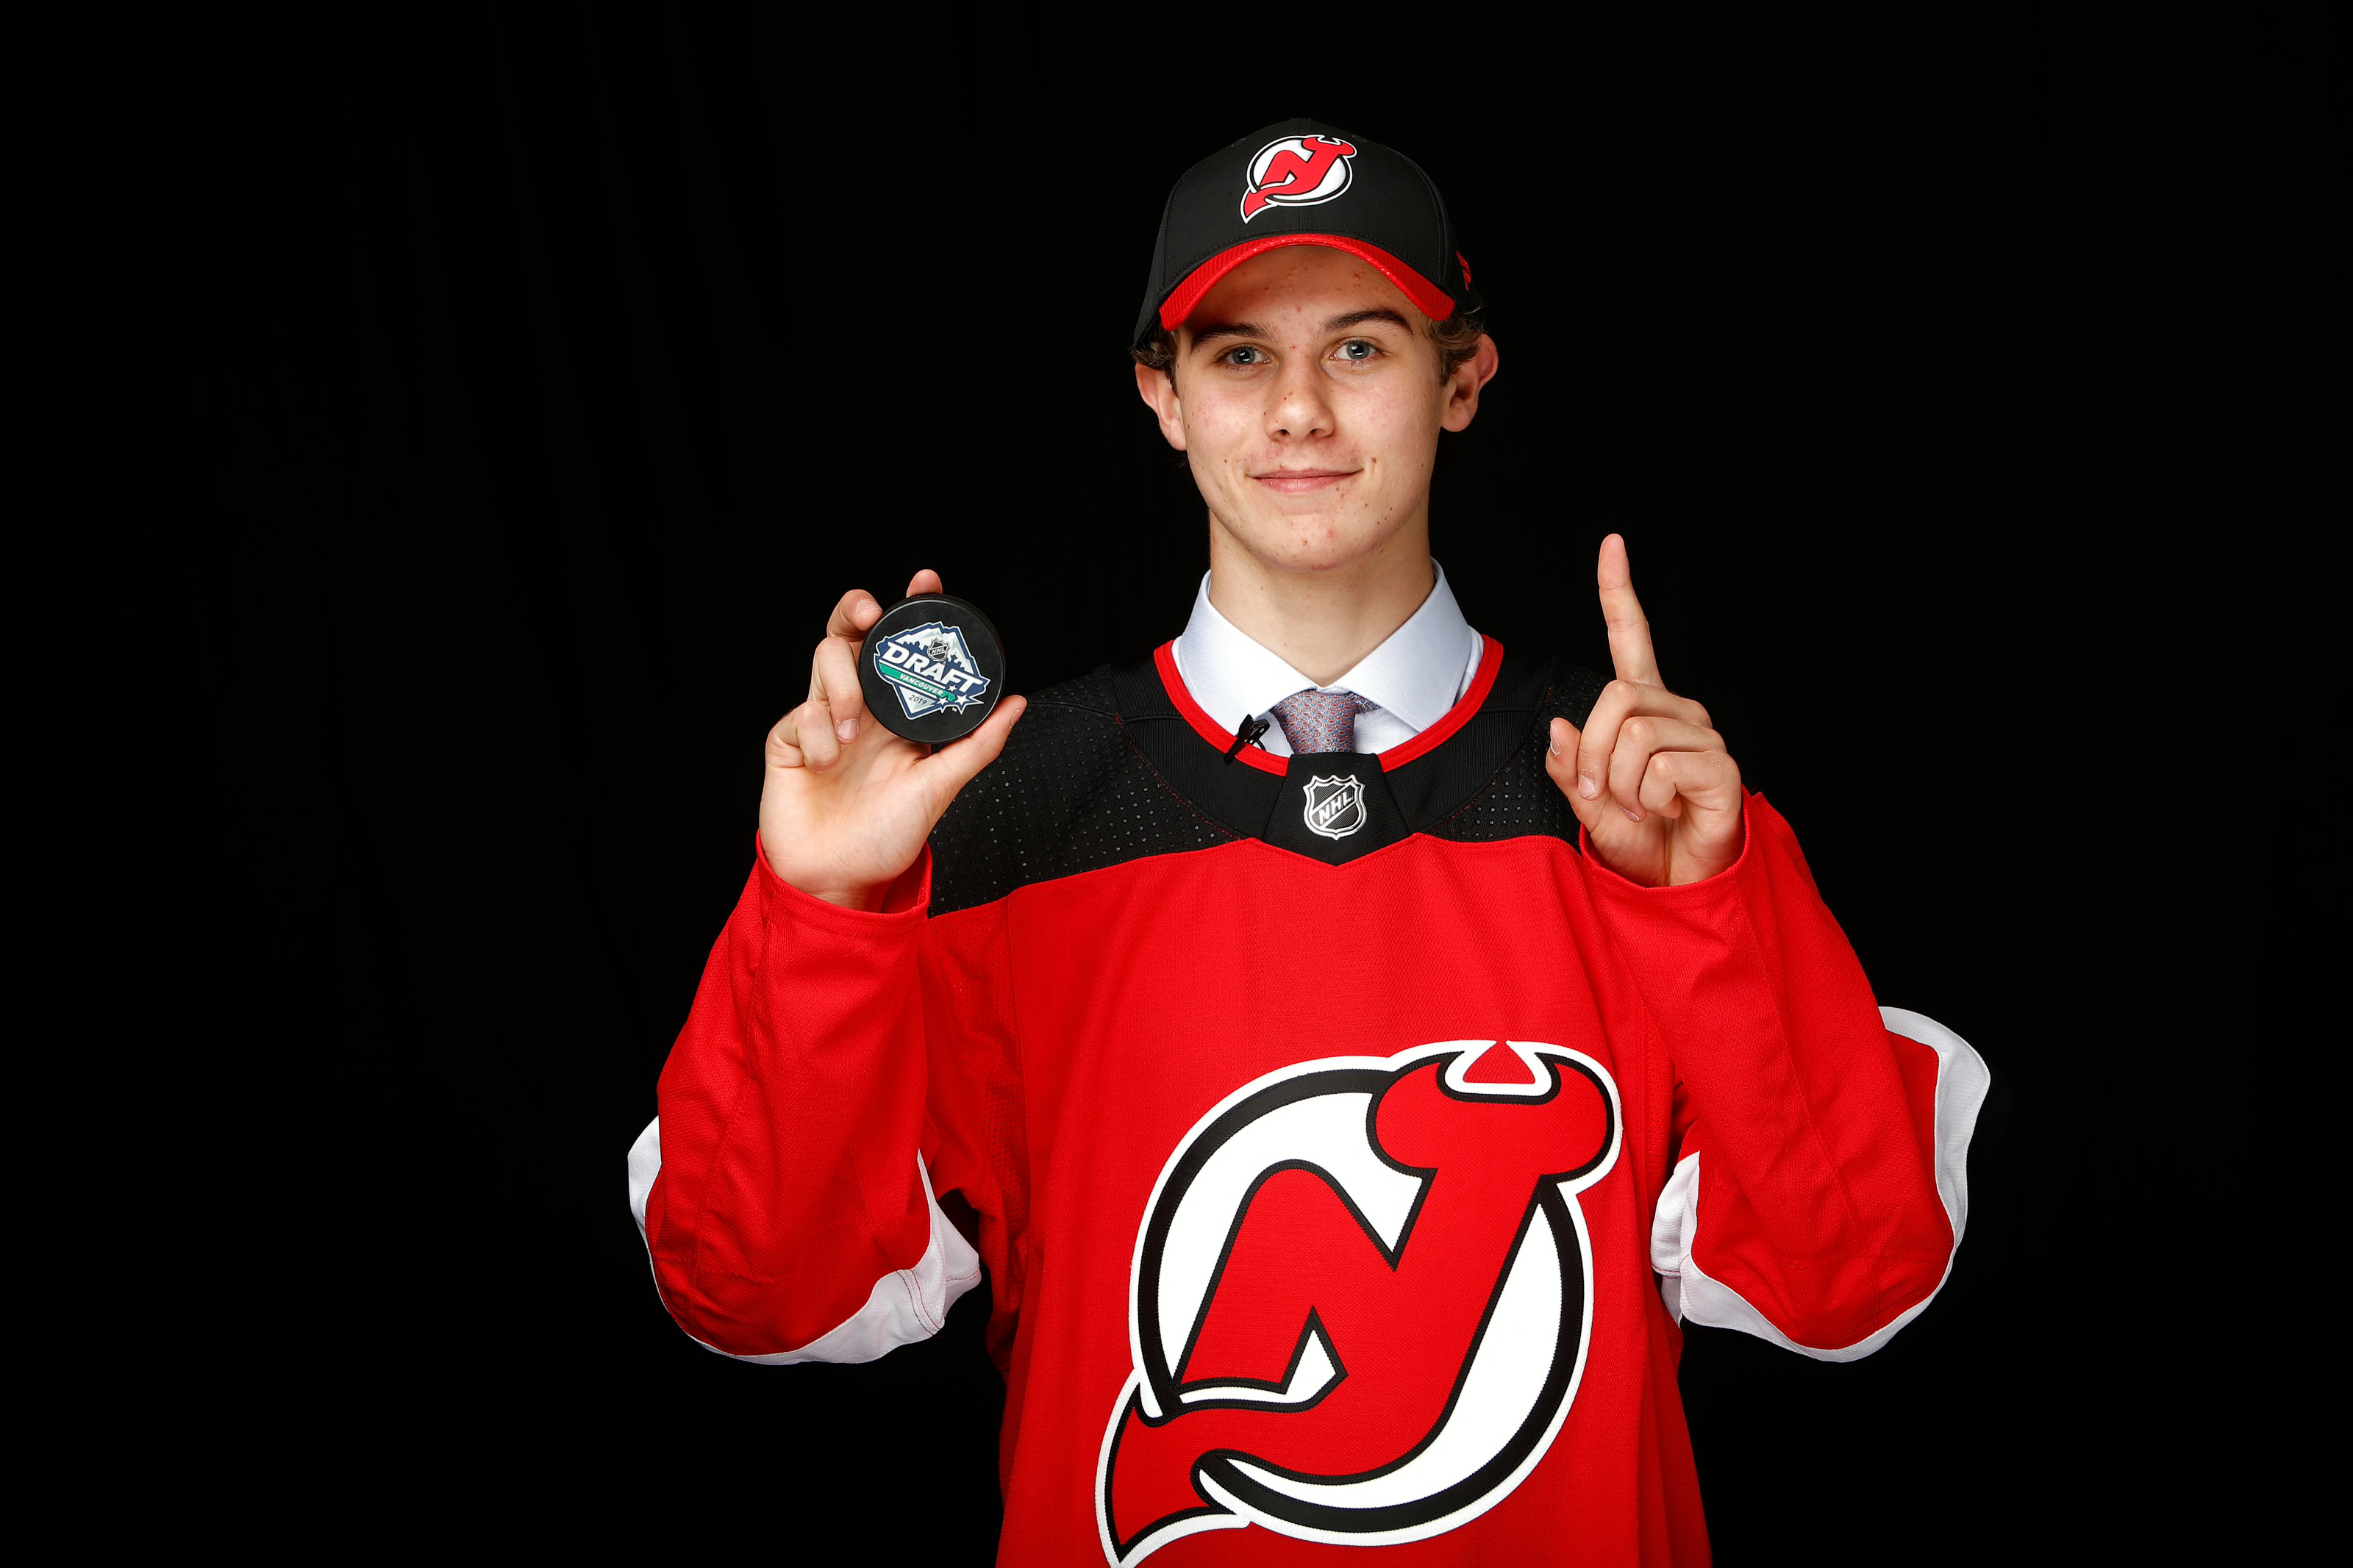 Grab yourself a 🍩 and check out this - New Jersey Devils